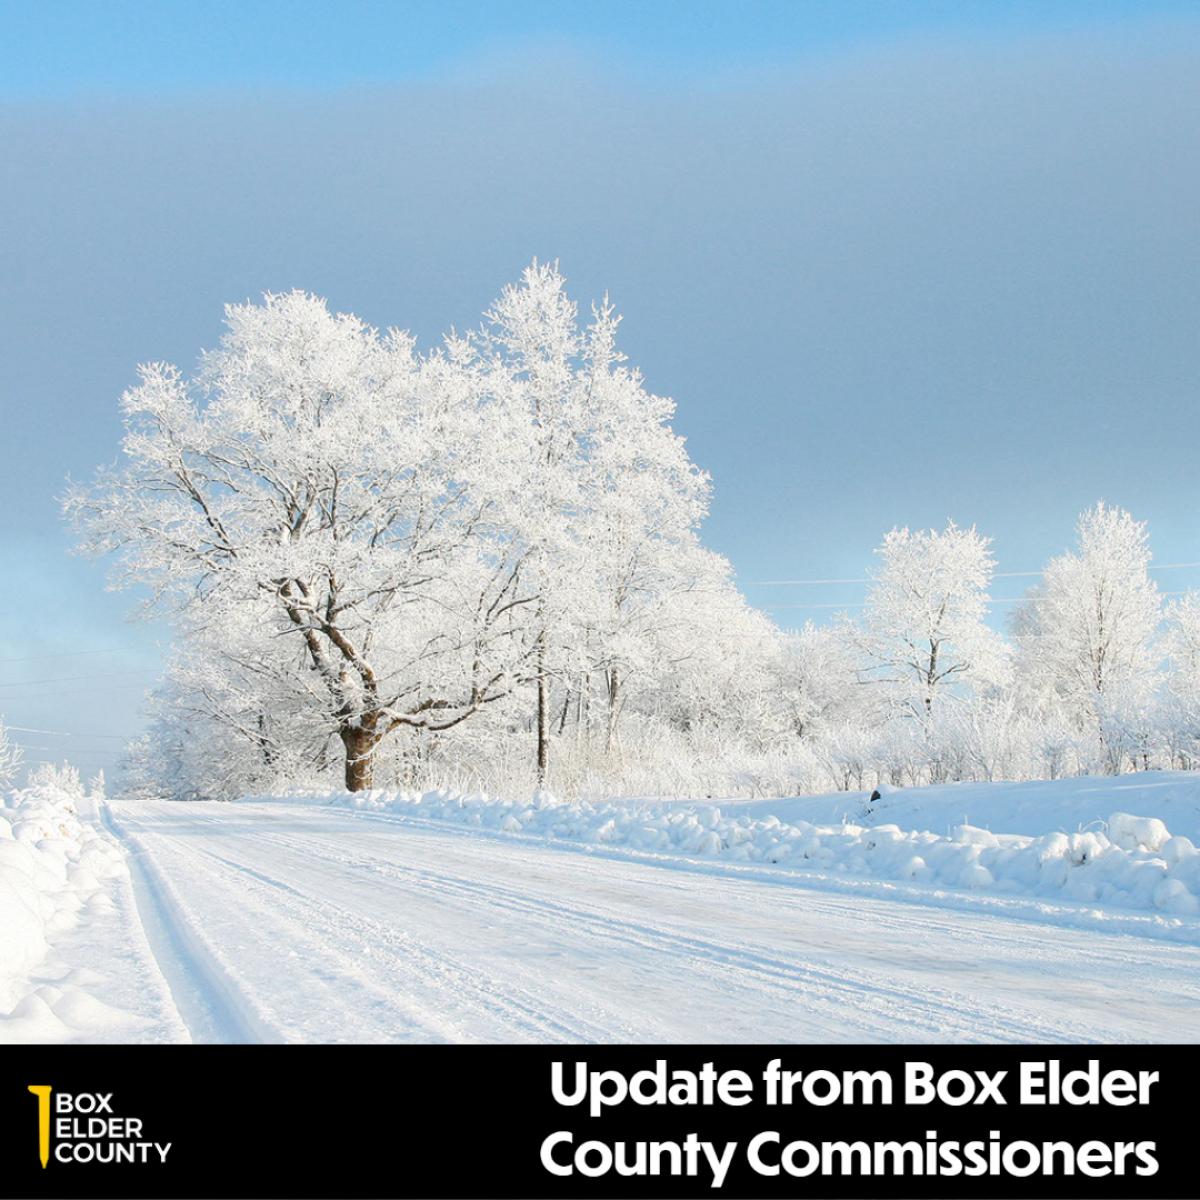 Update from Box Elder County Commissioners